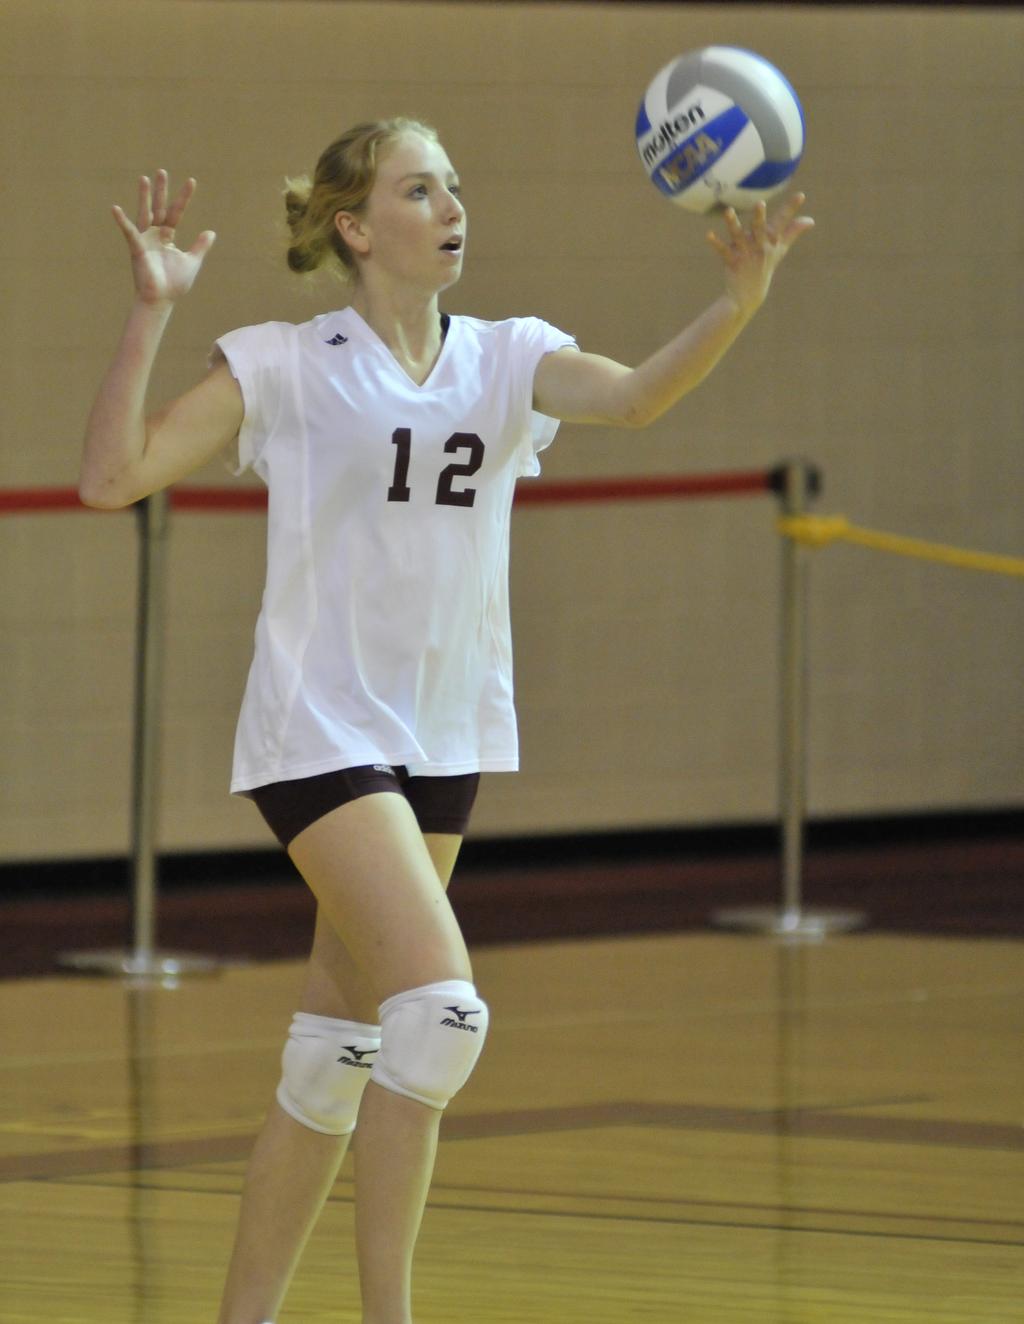 Sophomore All-Little East Conference Outside Hitter Captain Breanna Boyer 2010 Rhode Island College Women s Volleyball Schedule Date Sept. 2 Sept. 4-5 Sept. 10-11 Sept. 15 Sept. 18 Sept. 18 Sept. 21 Sept.